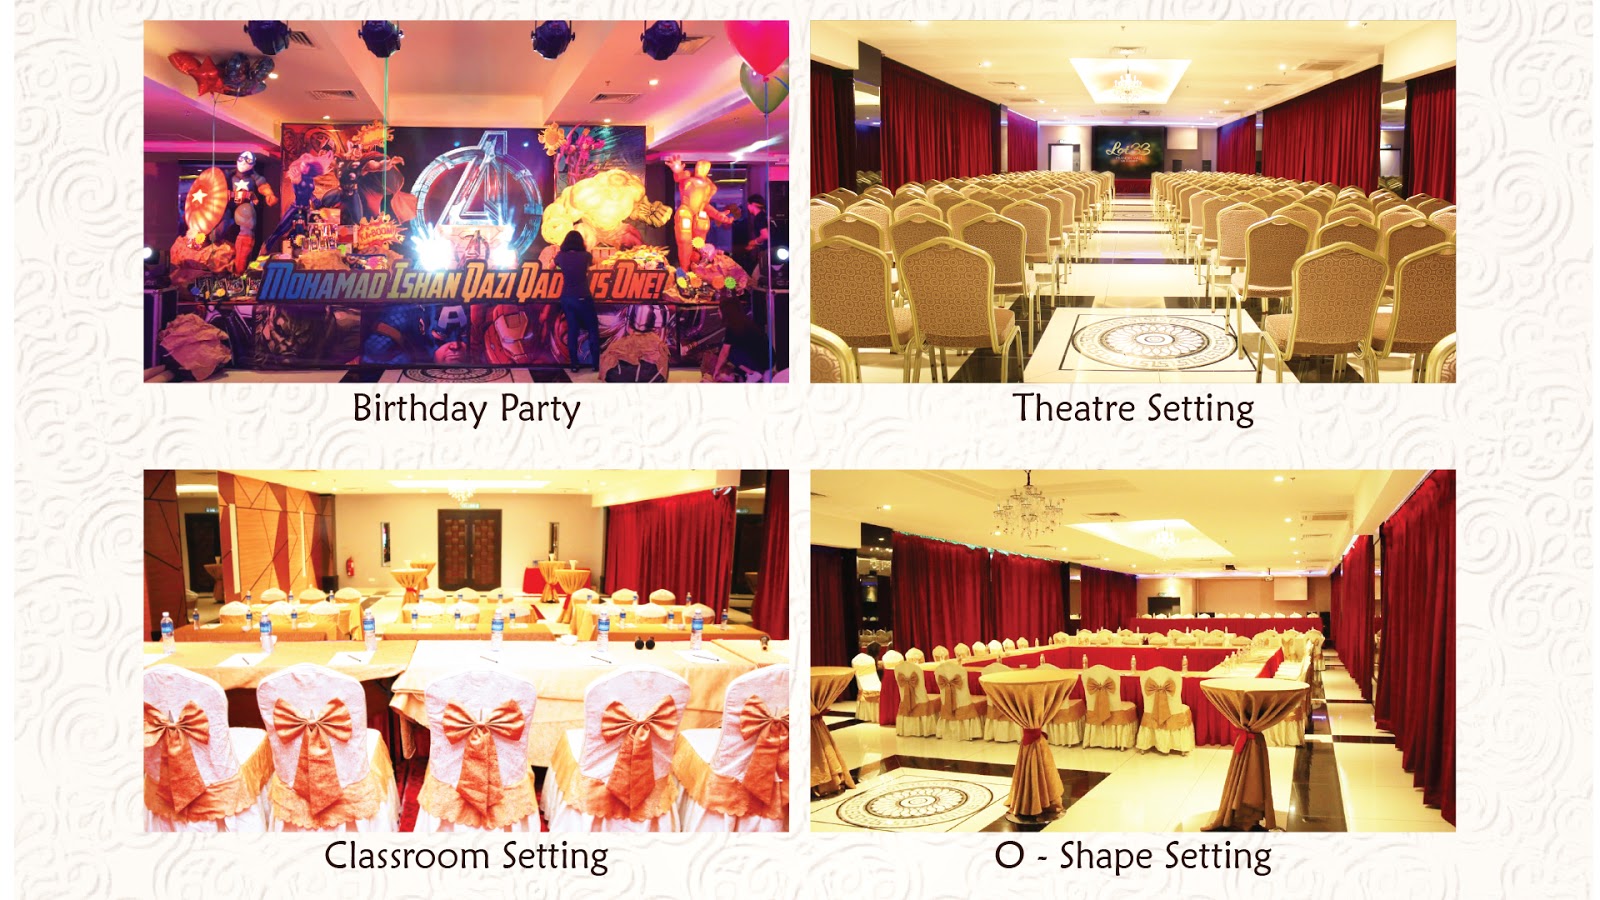 Convention 33 for Event & Function @ Prangin Mall, Georgetown, Penang